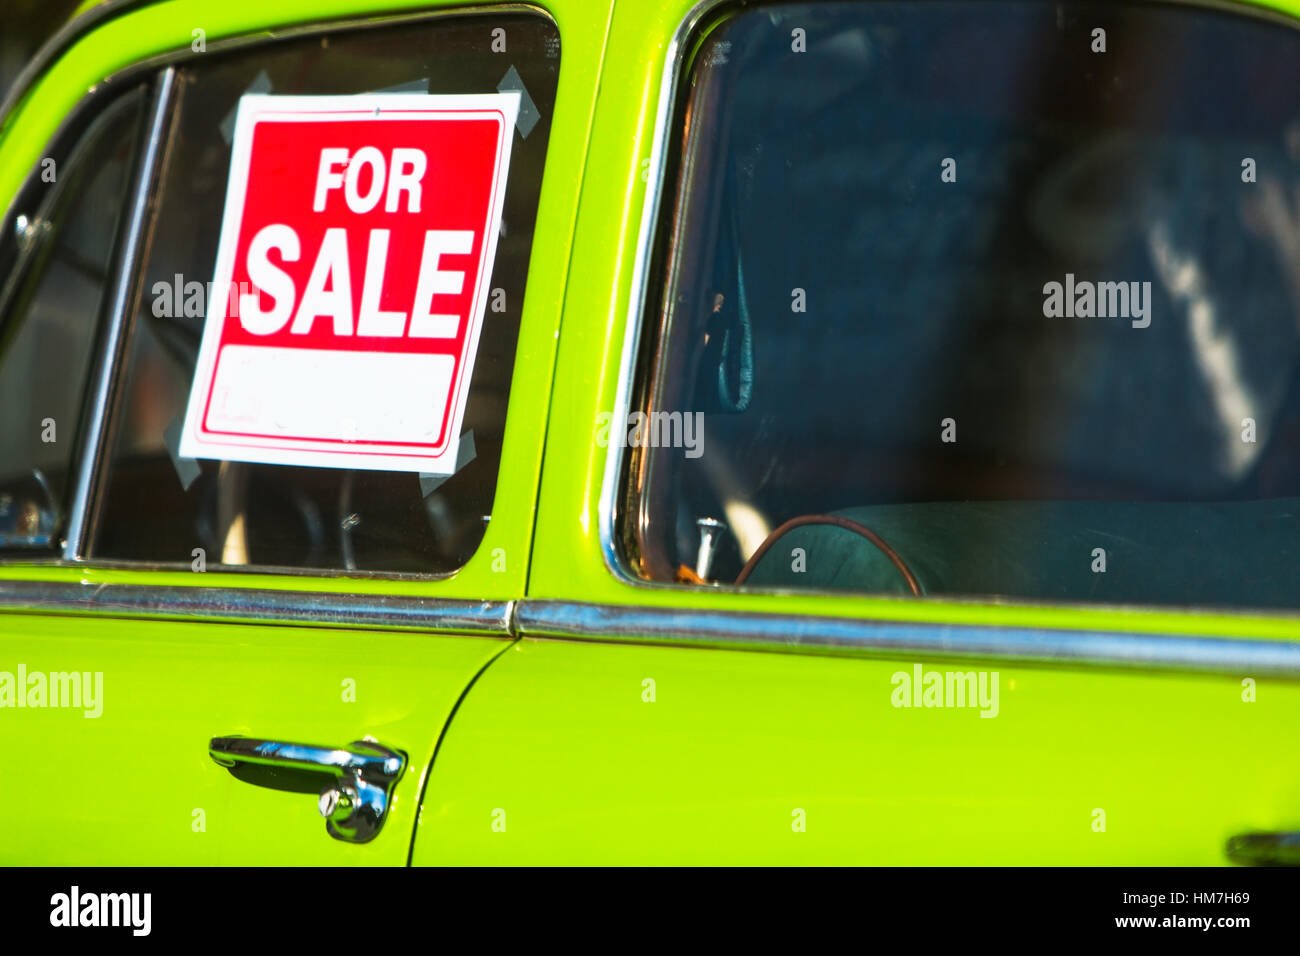 For sale sign on car window Stock Photo